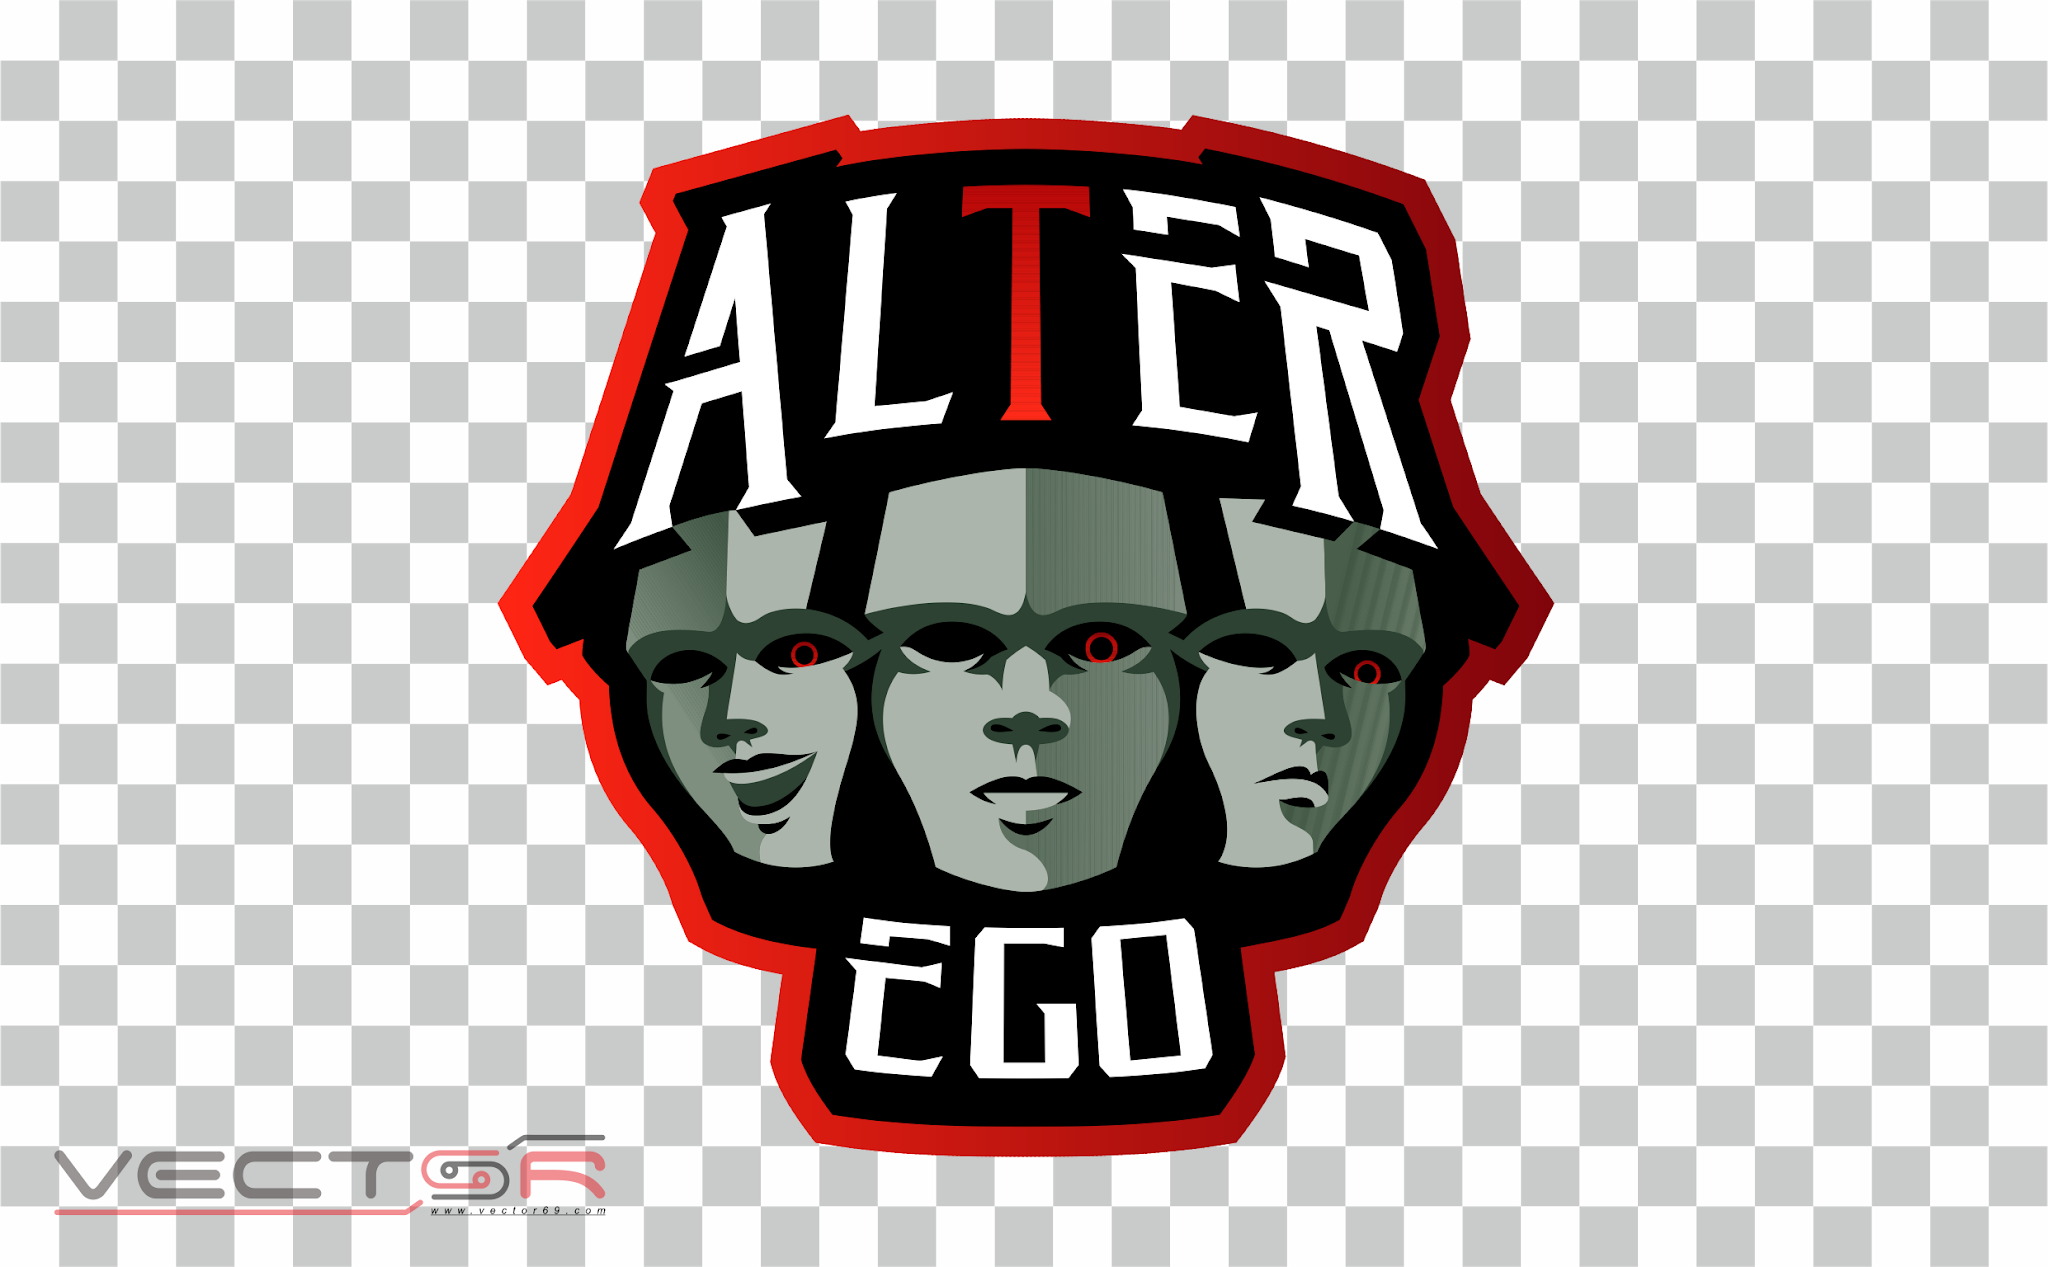 Alter Ego Esports Logo - Download Vector File PNG (Portable Network Graphics)